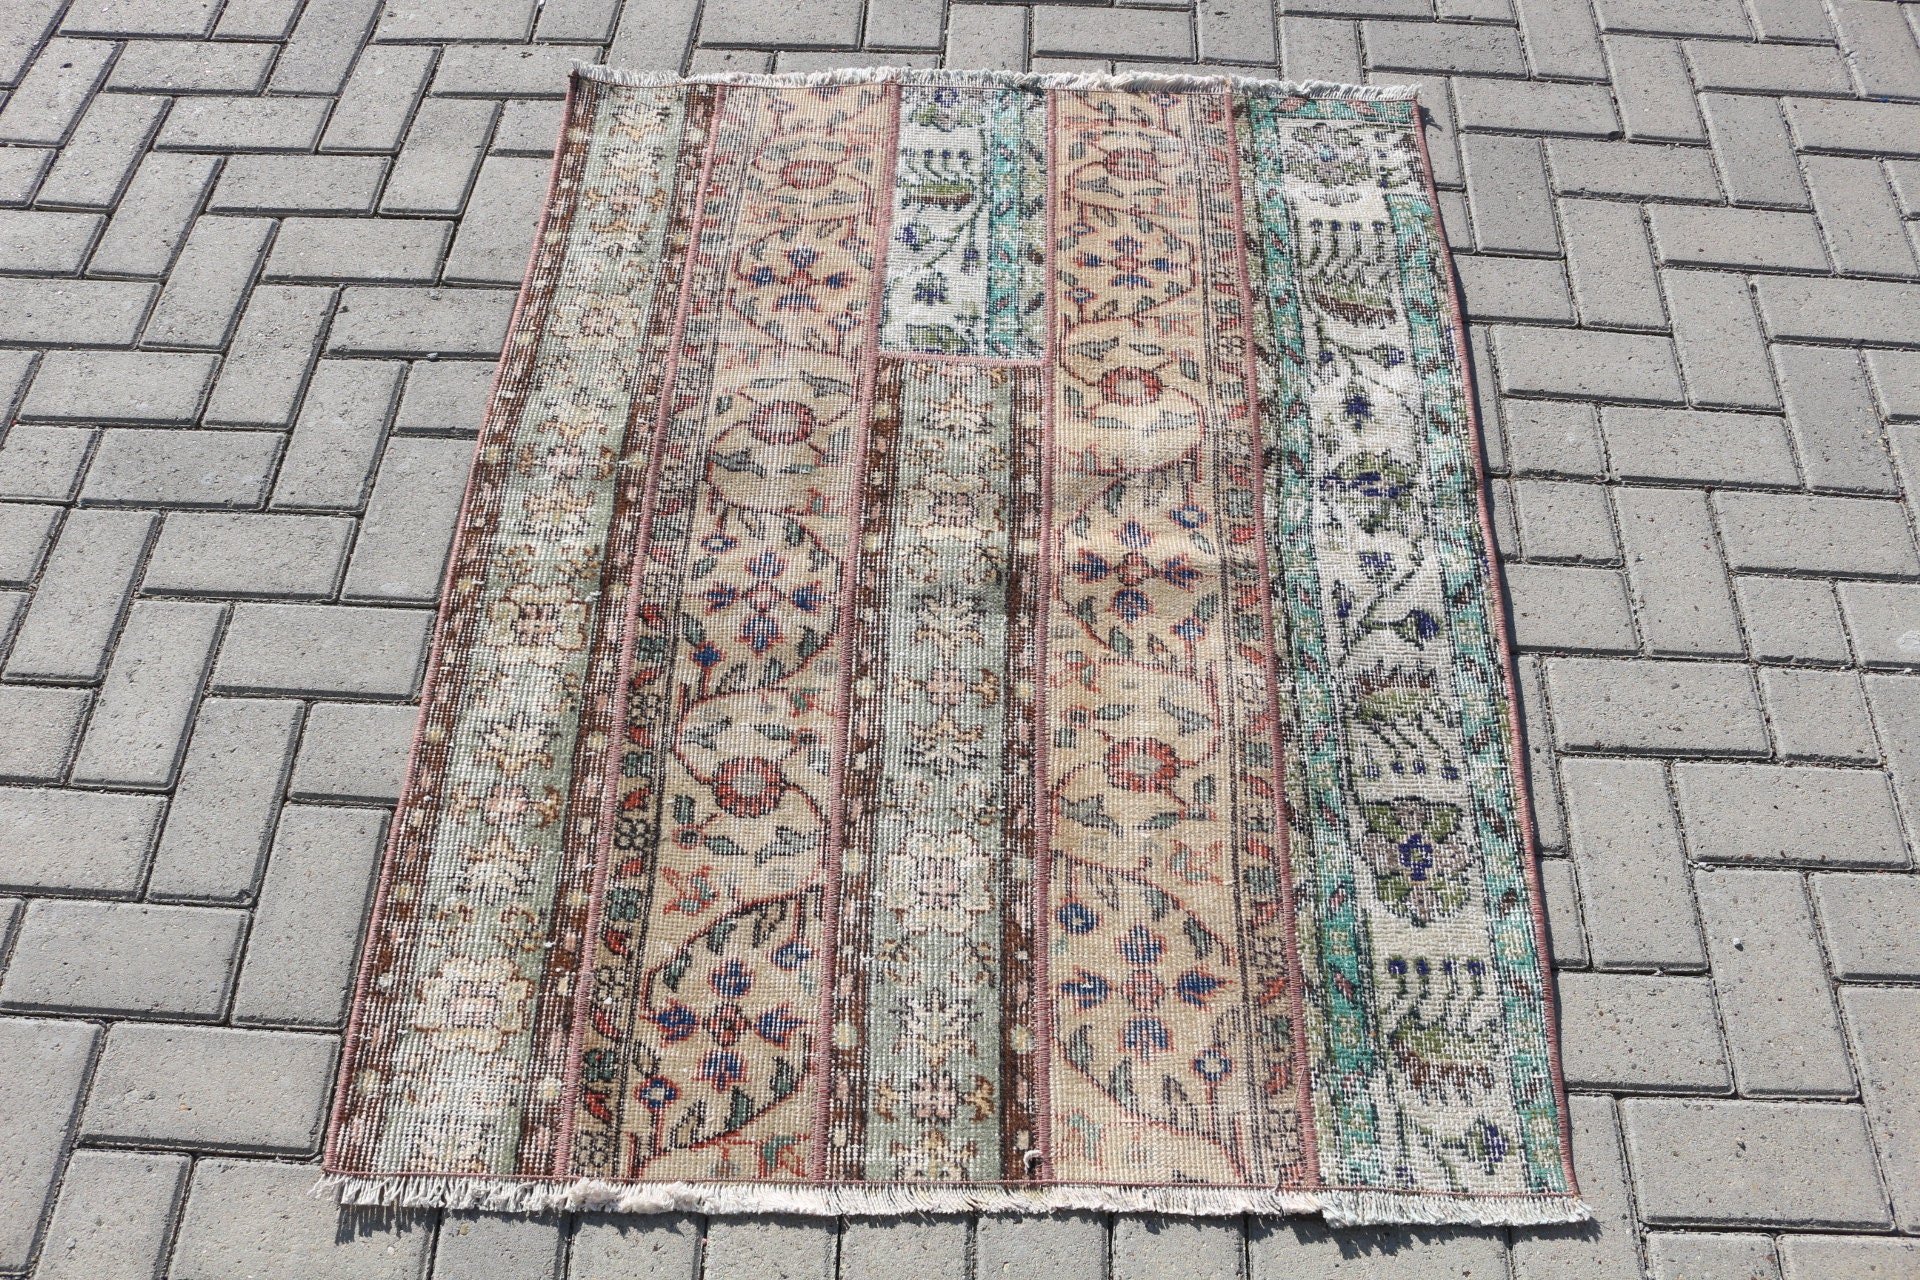 Turkish Rug, Anatolian Rug, Brown Oushak Rugs, Bright Rug, Vintage Rug, Bedroom Rugs, Kitchen Rugs, 3.2x4.1 ft Small Rugs